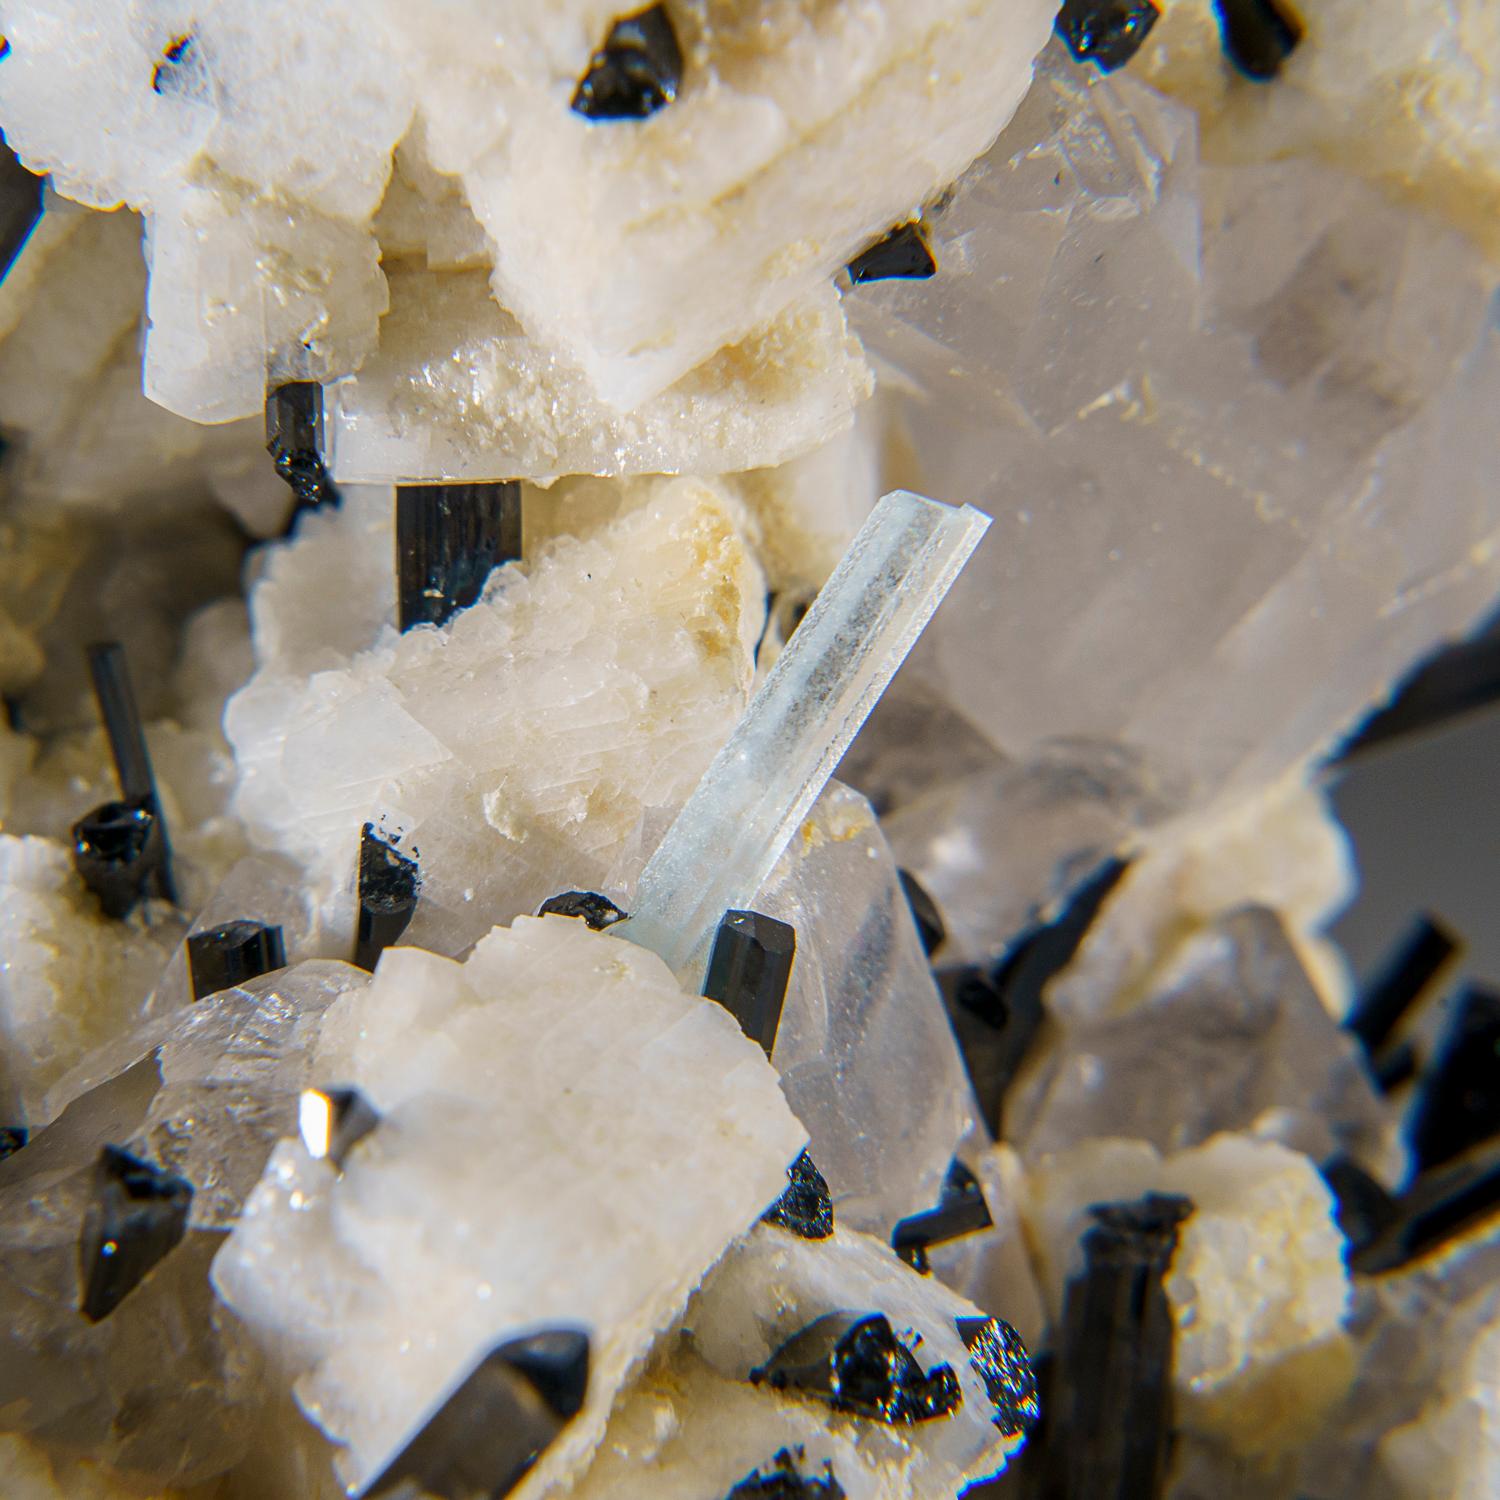 From Shigar Valley, Shigar District, Gilgit-Baltistan, Pakistan

Aesthetic cluster of white albite with several blue aquamarine crystals running through the middle. The aquamarine crystal is flawless internally and has microscopic patterns on the